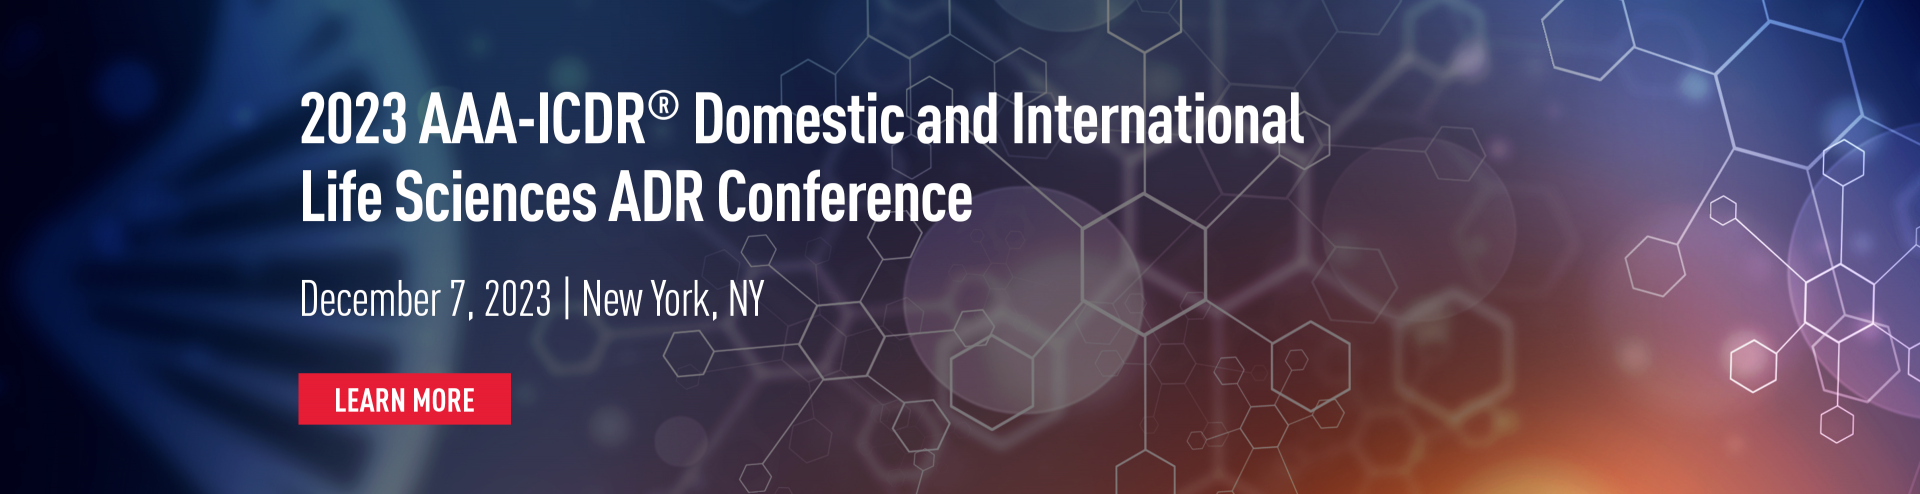 2023 AAA-ICDR Domestic and International Life Sciences ADR Conference